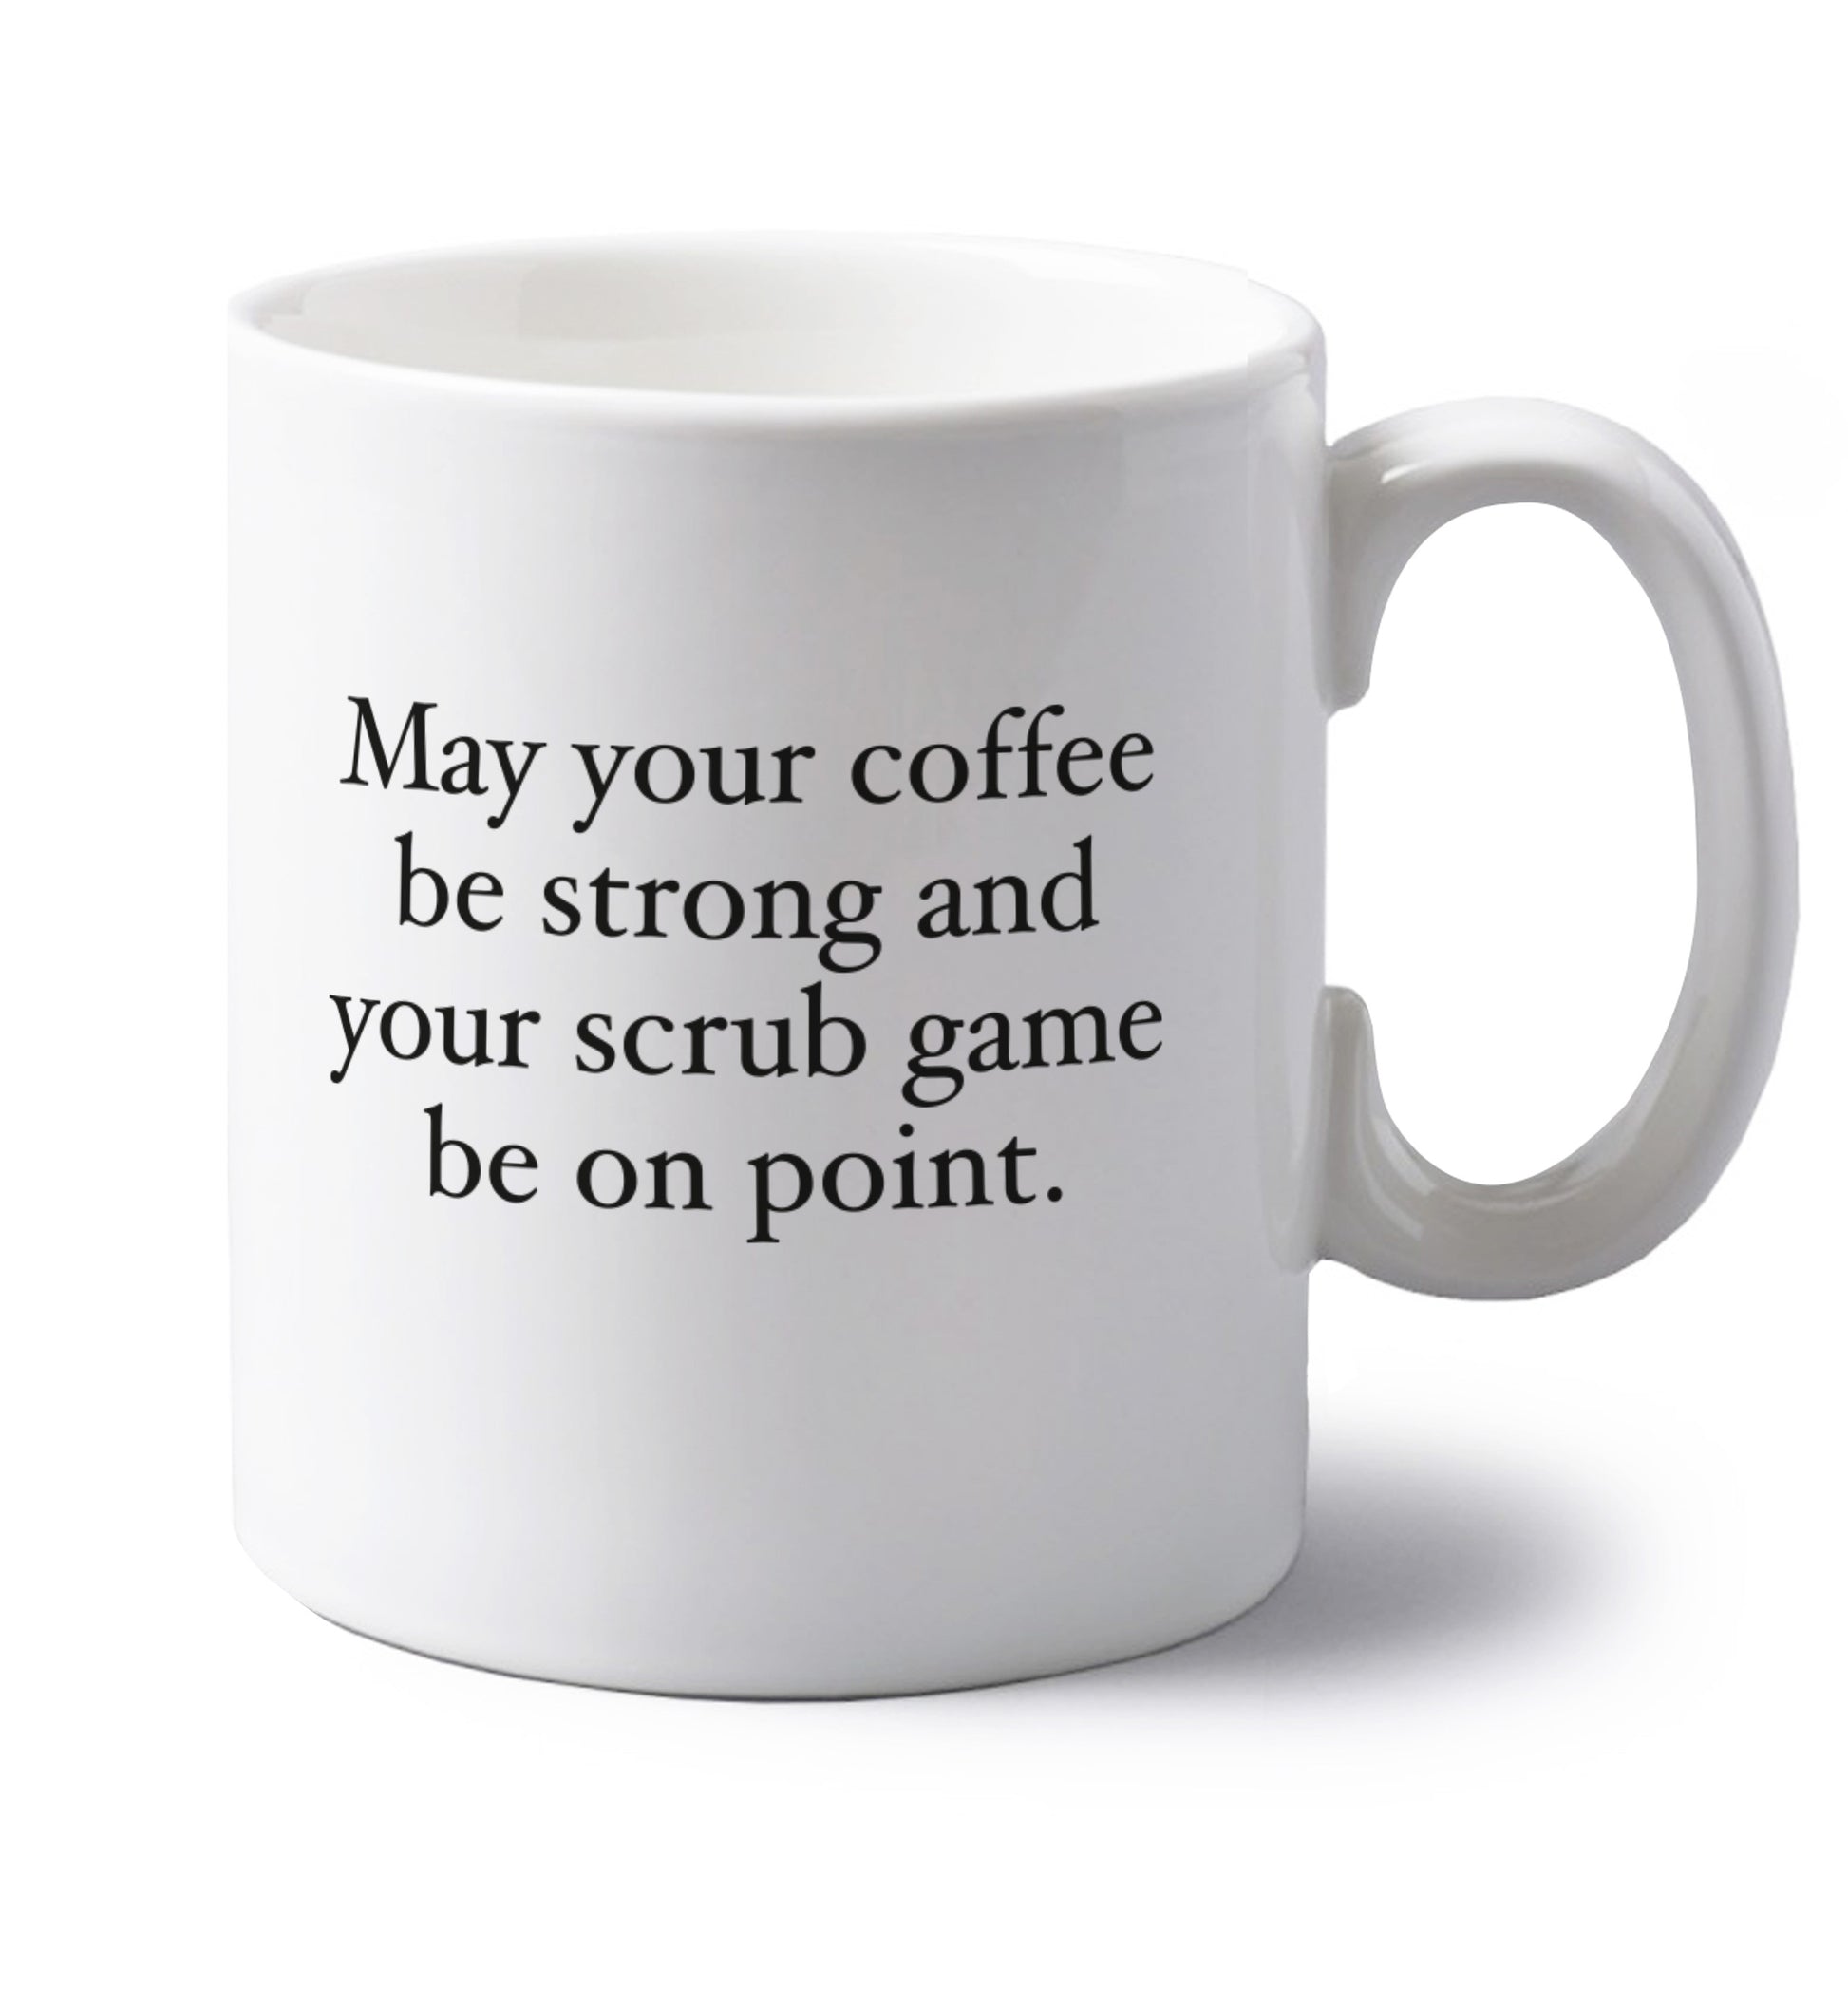 May your caffeine be strong and your scrub game be on point left handed white ceramic mug 